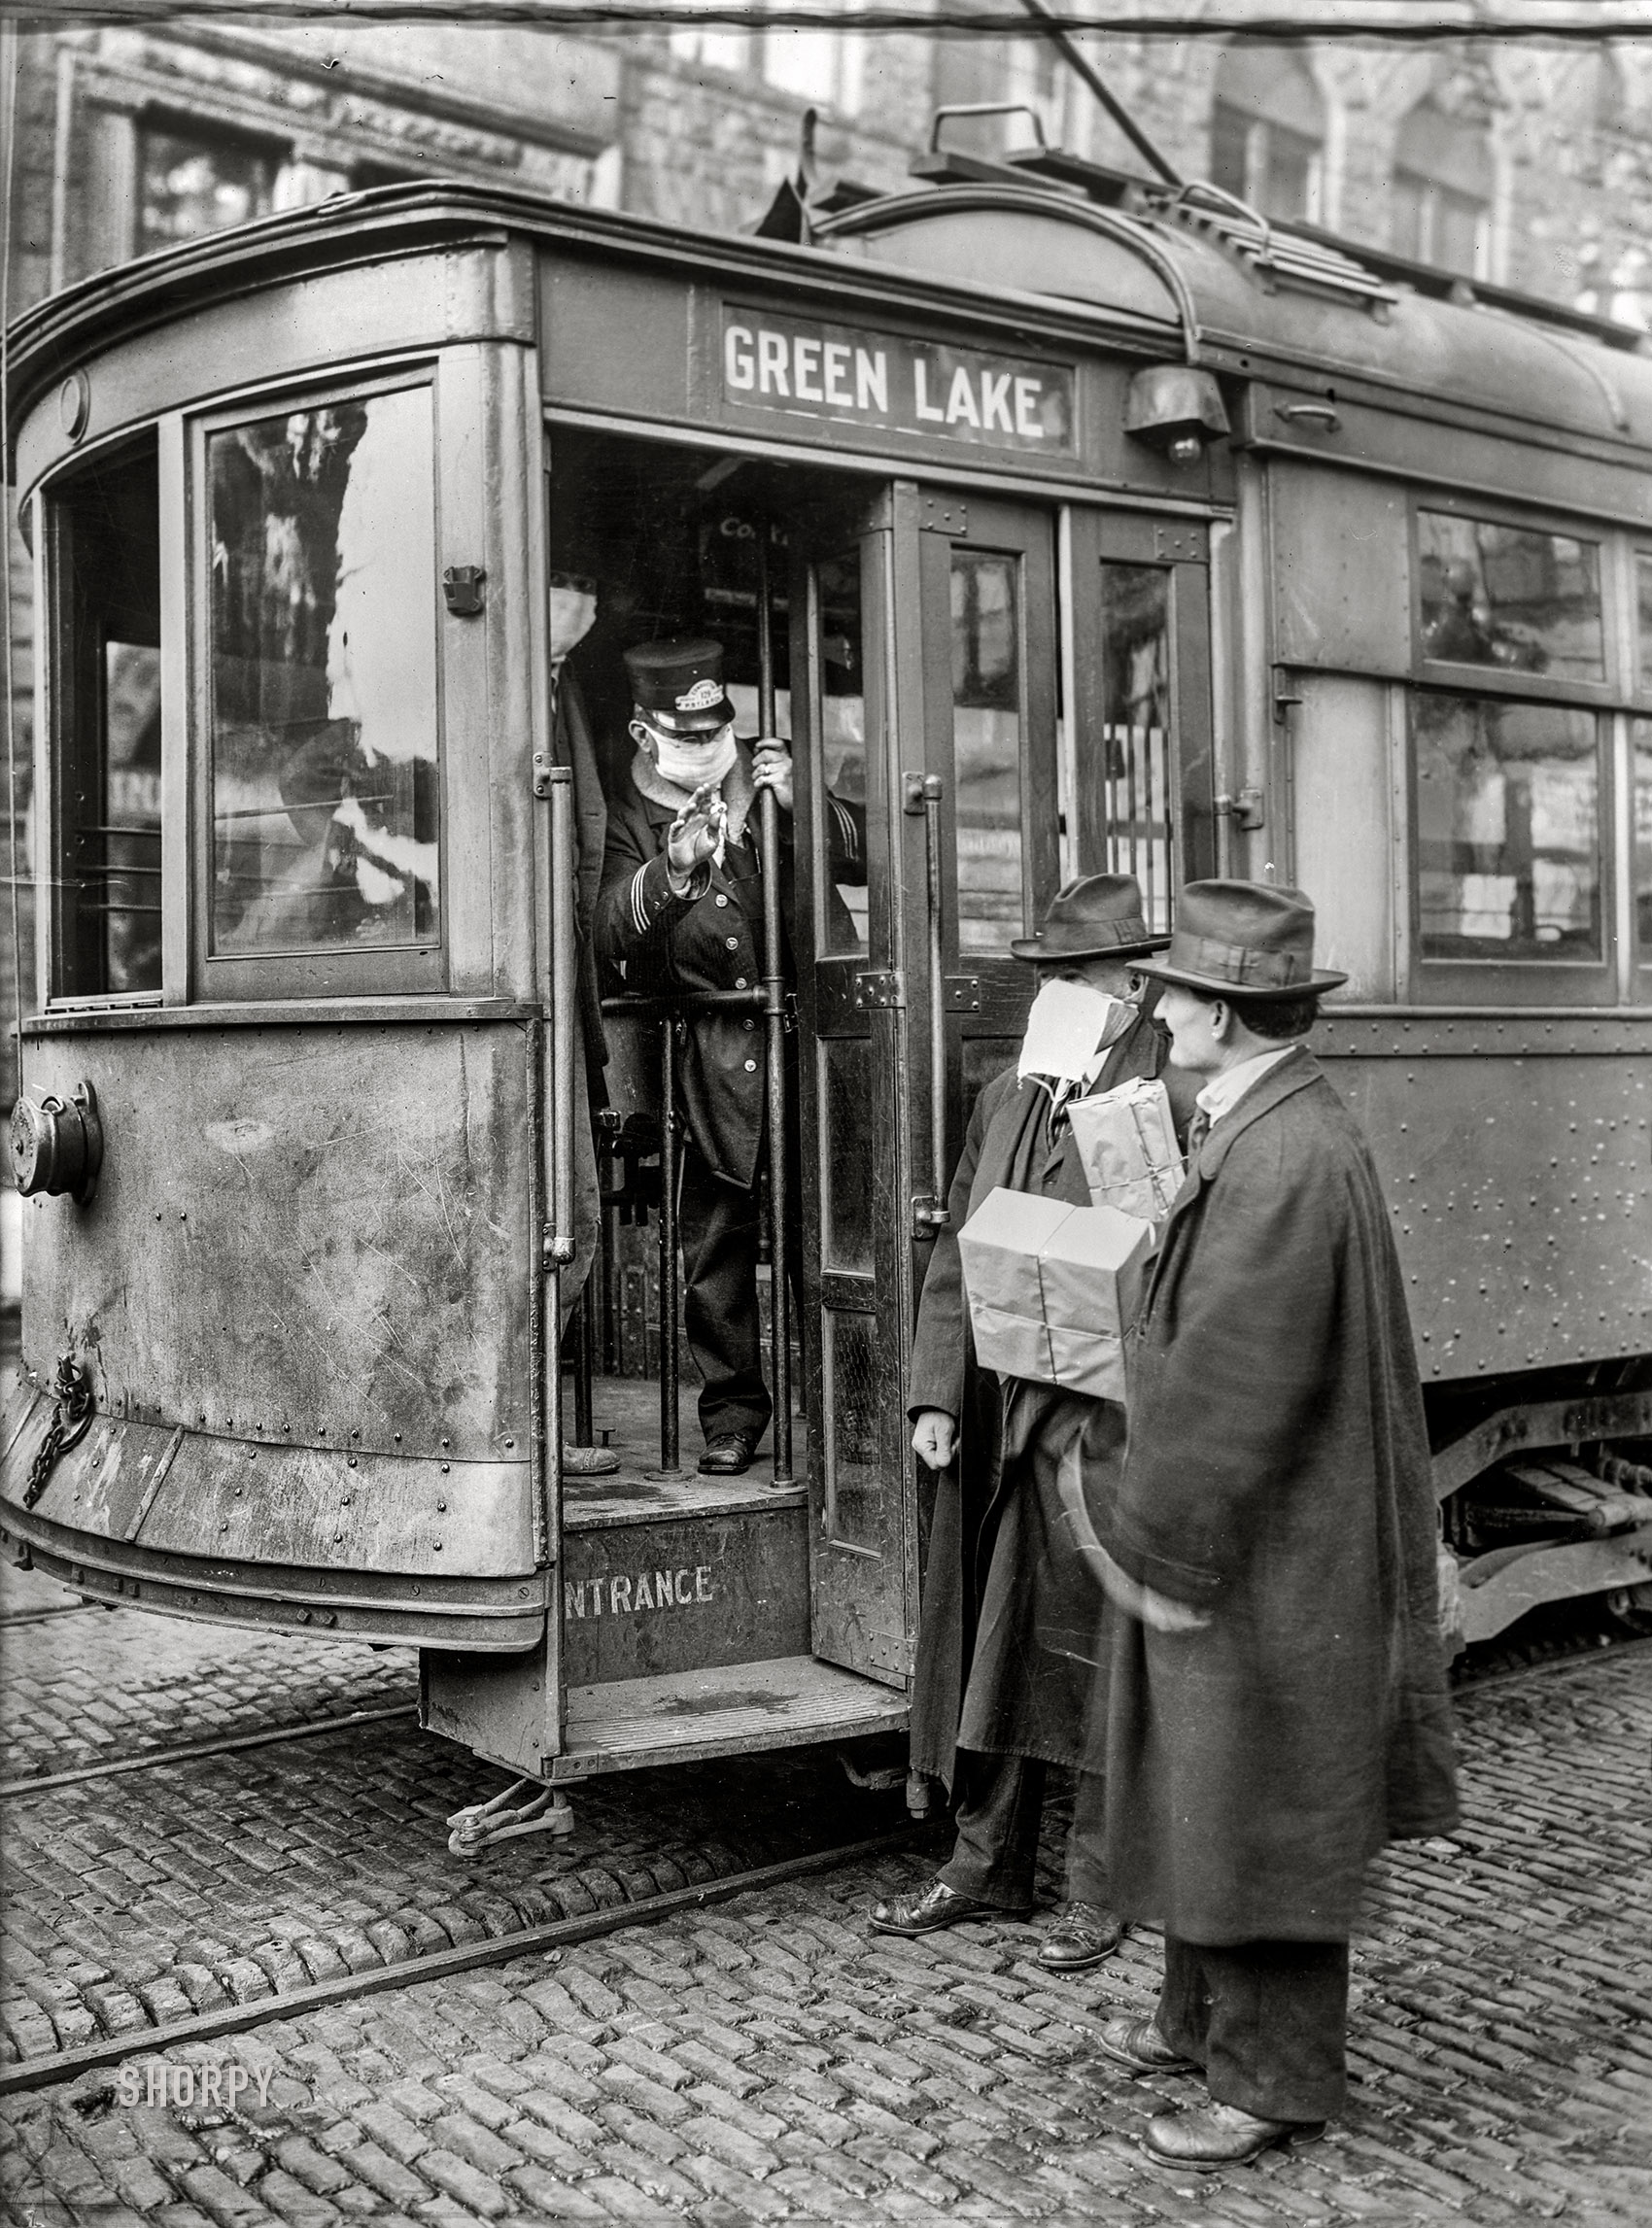 Ca. 1918-1919. "Precautions taken in Seattle, Wash., during the Spanish Influenza Epidemic would not permit anyone to ride on the street cars without wearing a mask. 260,000 of these were made by the Seattle Chapter of the Red Cross which consisted of 120 workers, in three days." 5x7 glass negative, American National Red Cross Photograph Collection. View full size.